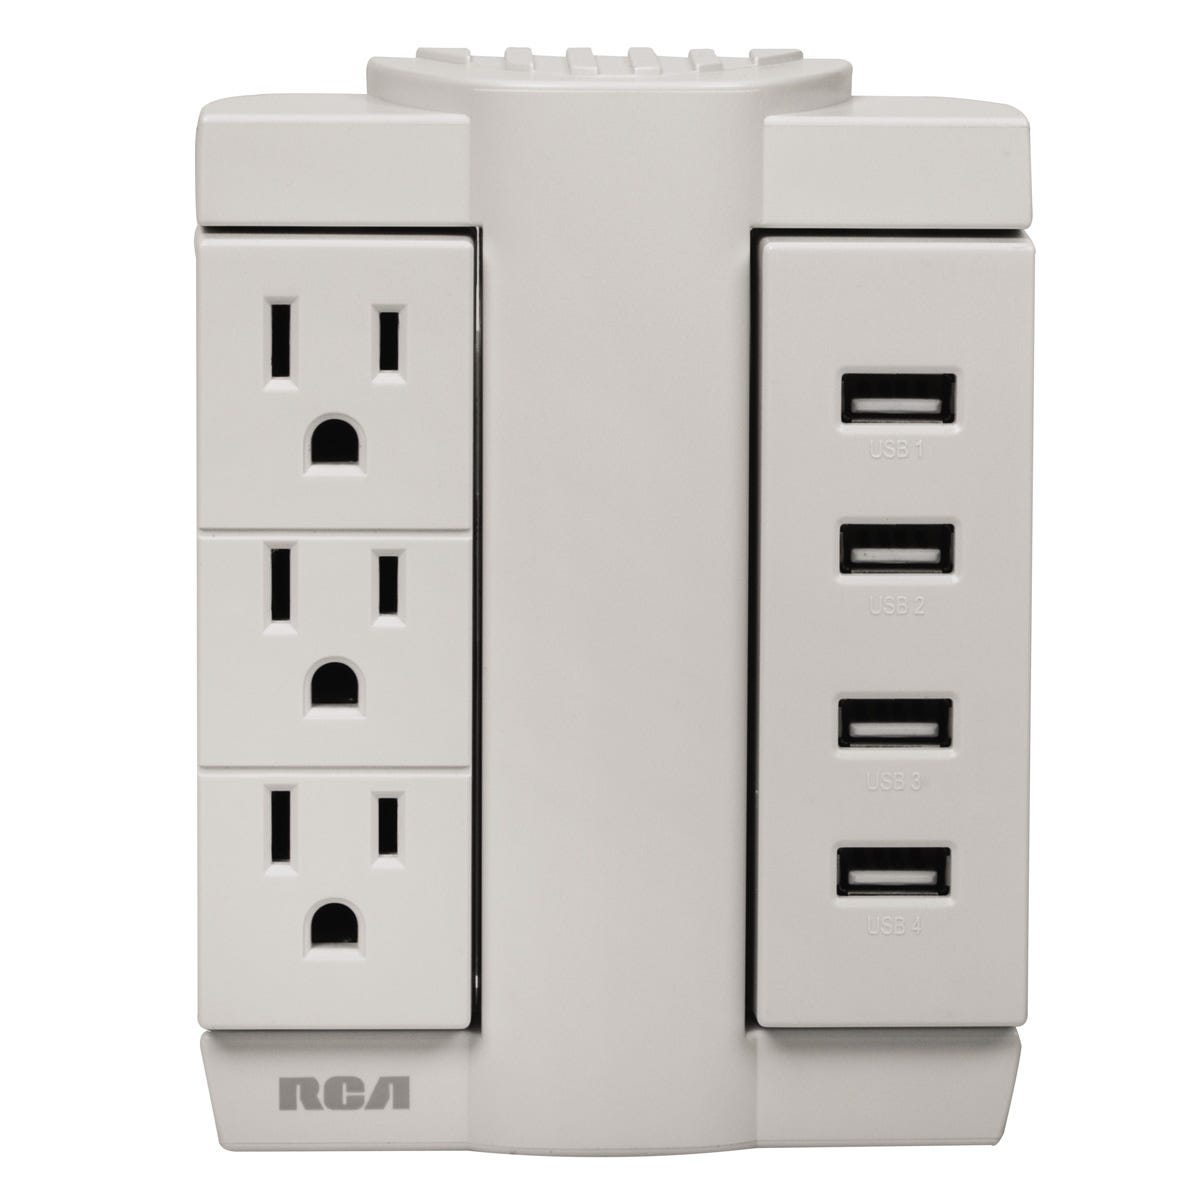 keyword research for surge protector how - Whole-house surge protectors are effectiveefficient in suppressing sudden